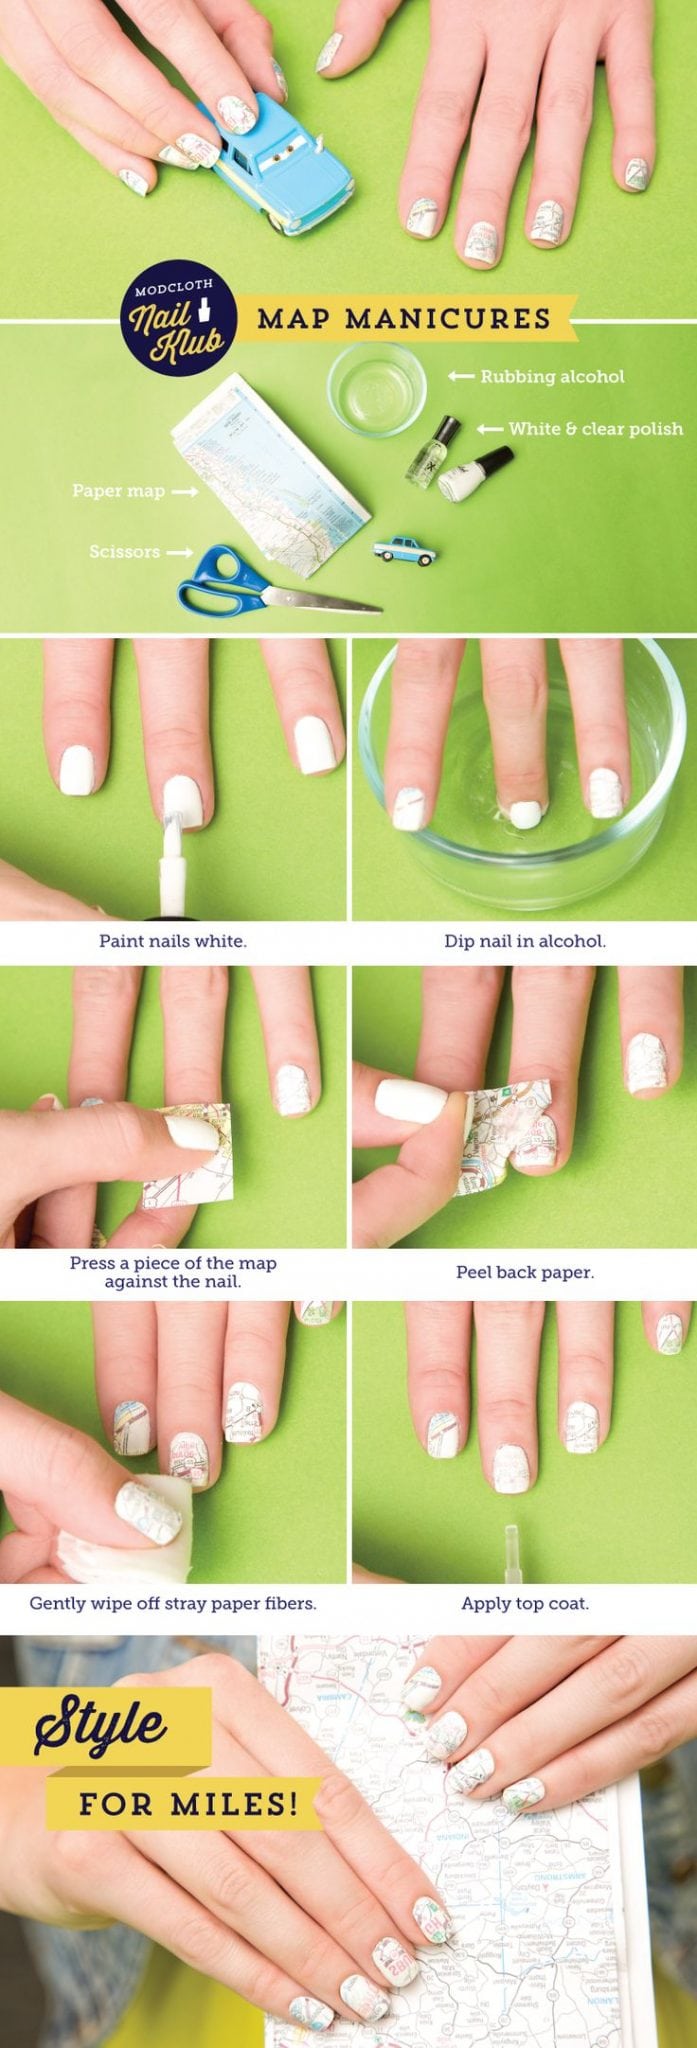 [ad_1]

Map nail art transfers tutorial. FYI…its way better to put the map piece in the alcohol then press it onto the finger.
Source by sastewoerd
[ad_2]
			
			…